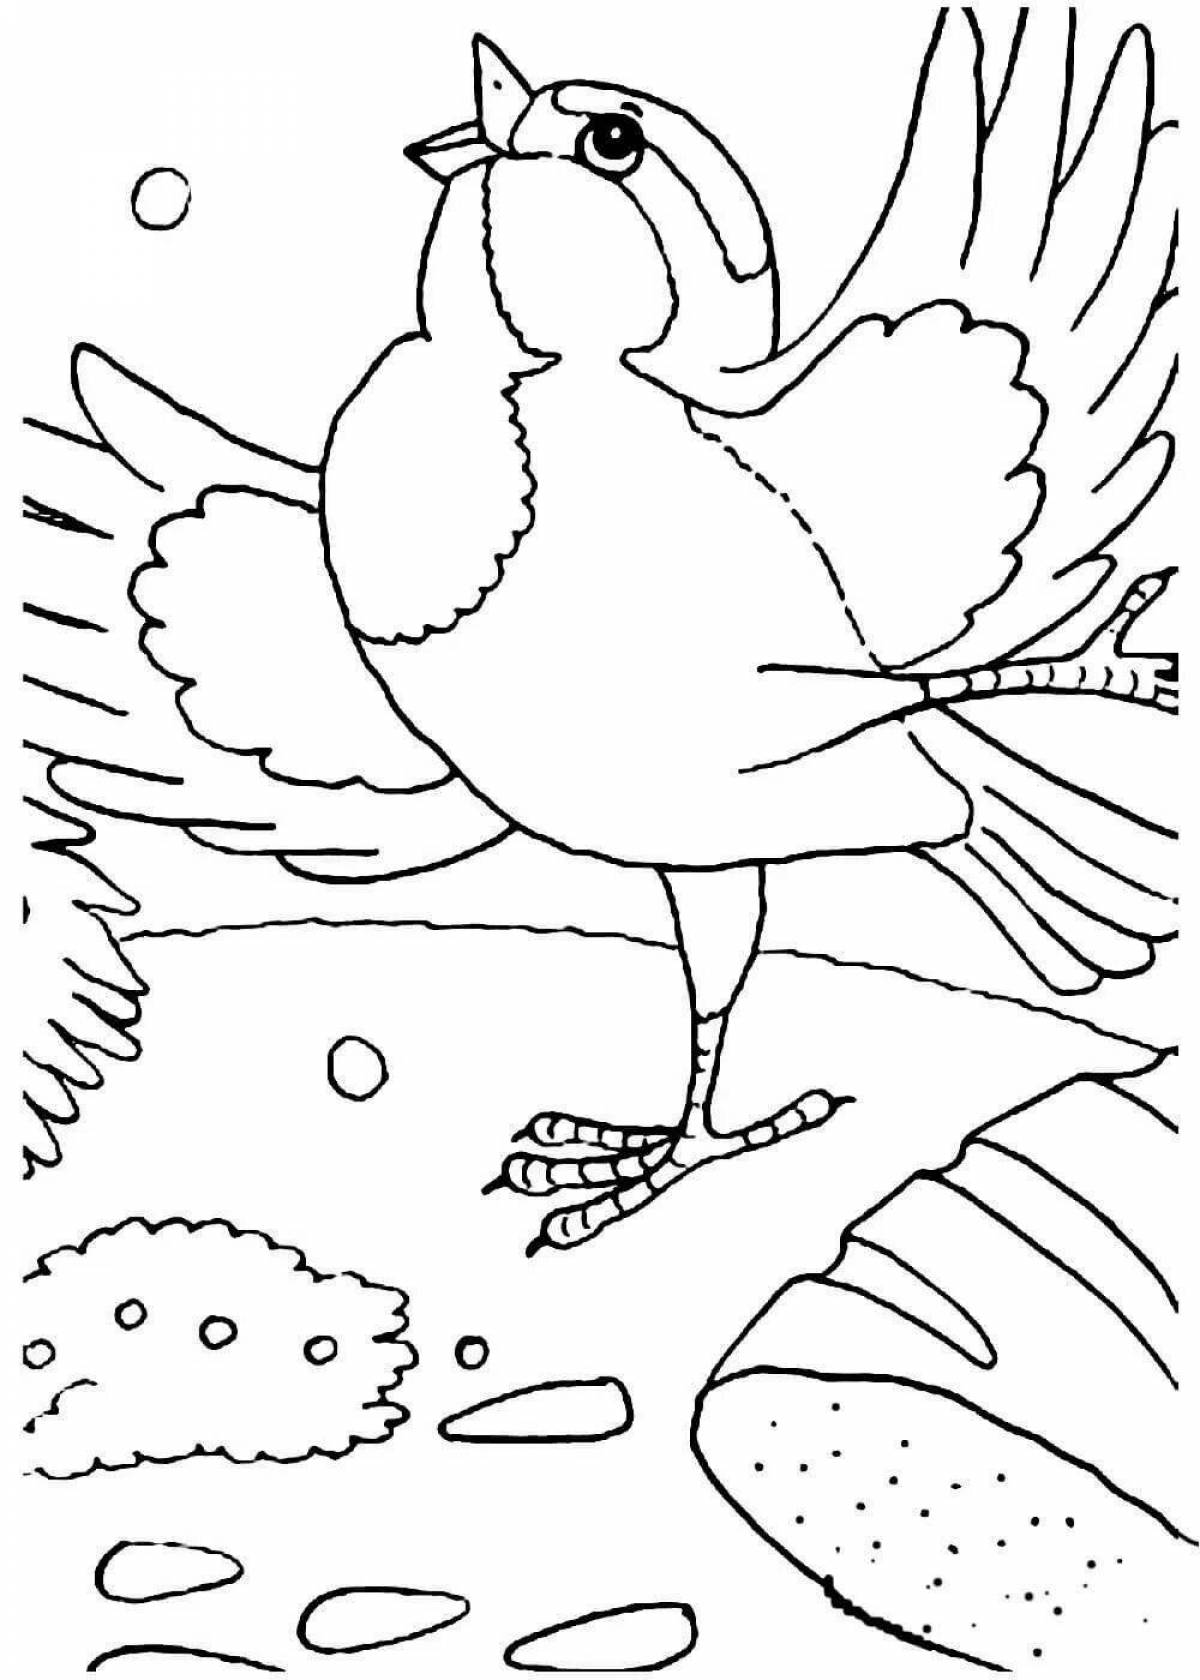 Humorous disheveled sparrow coloring book